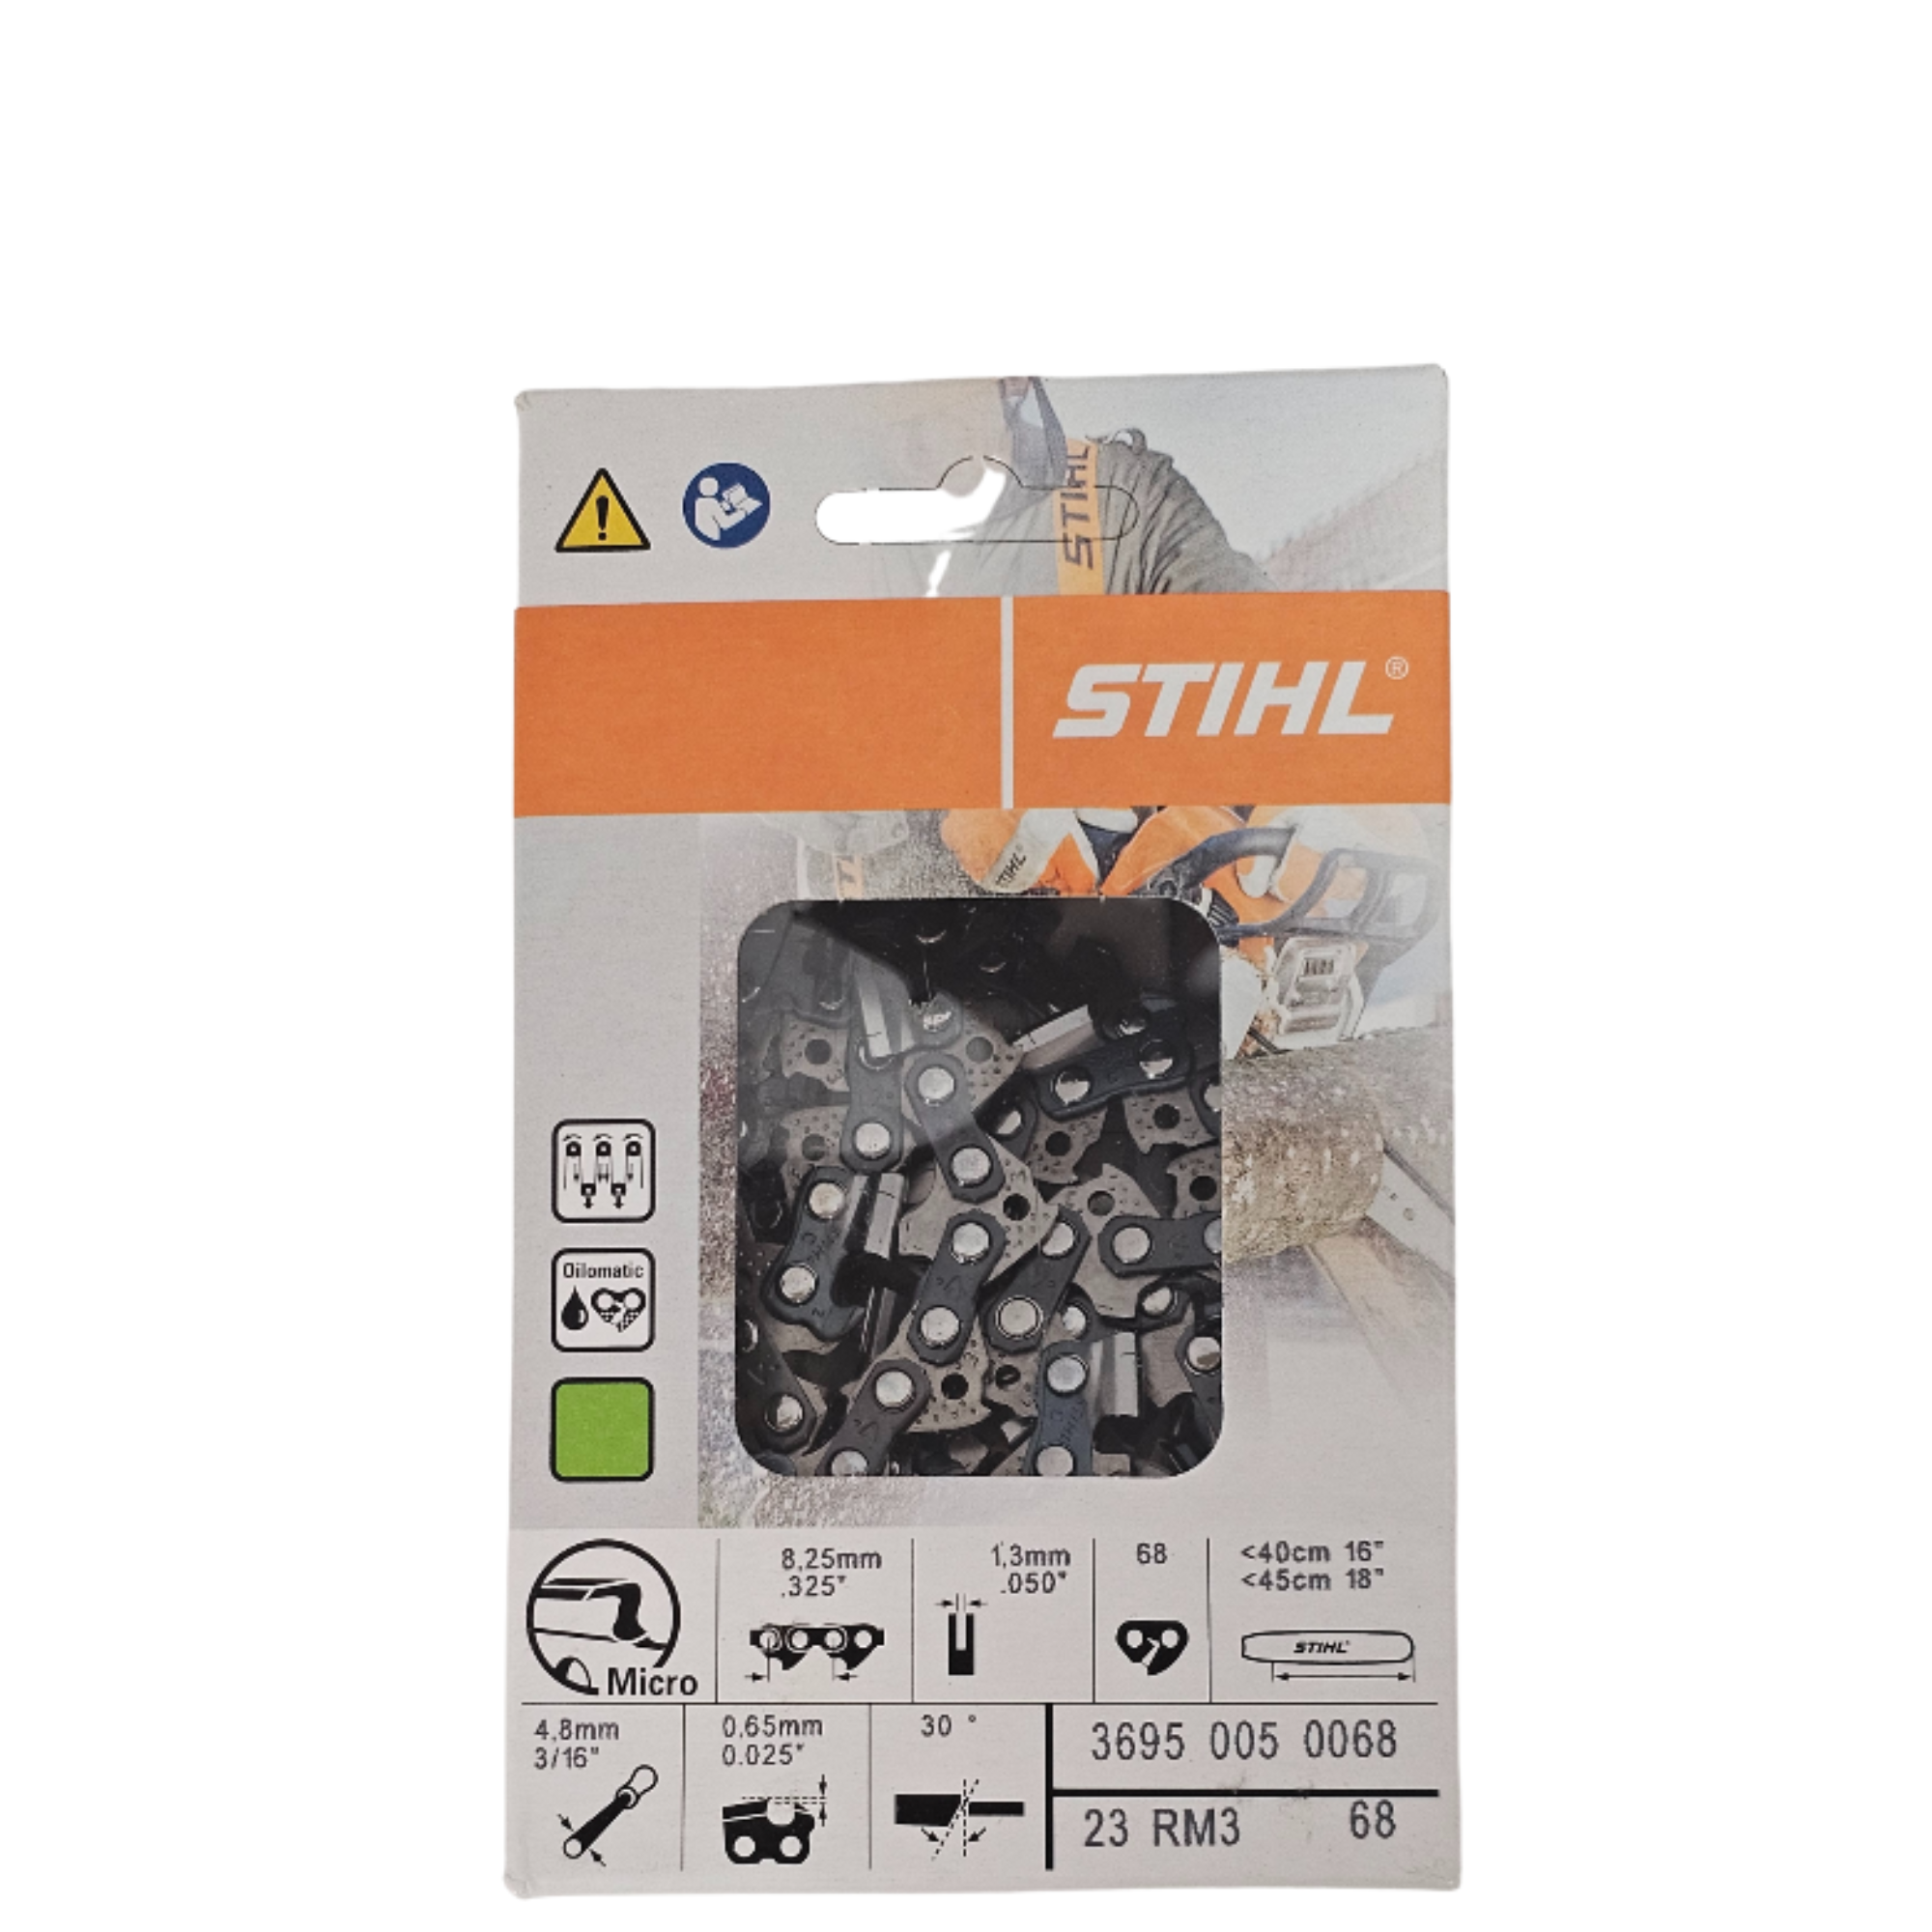 STIHL Oilomatic Rapid Micro 3 | 23 RM3 68 | 18 in. | 68 Drive Links | Chainsaw Chain | 3695 005 0068